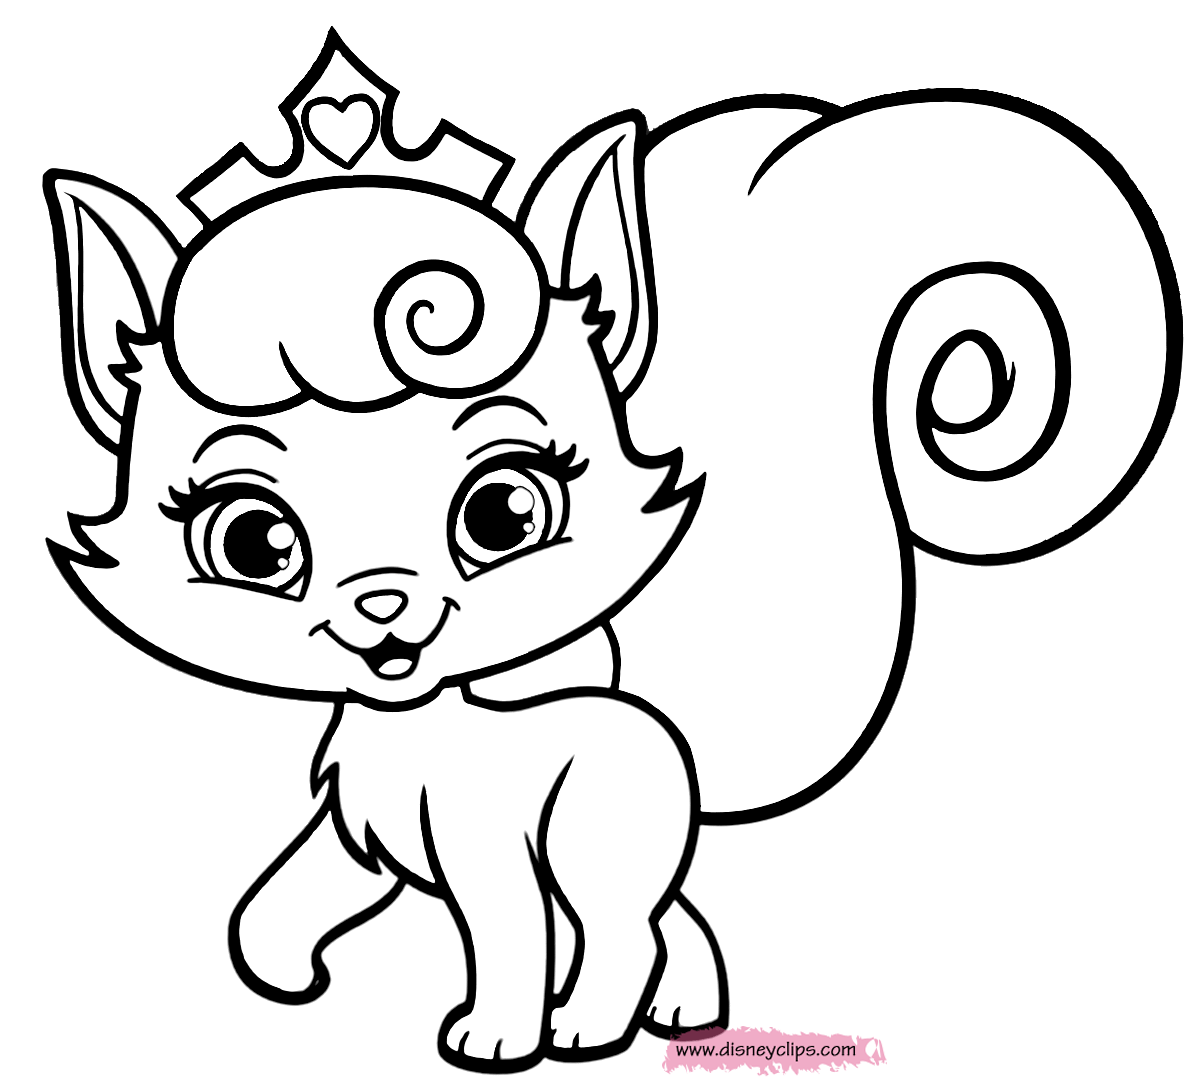 Kitten Coloring Pages | Free download on ClipArtMag